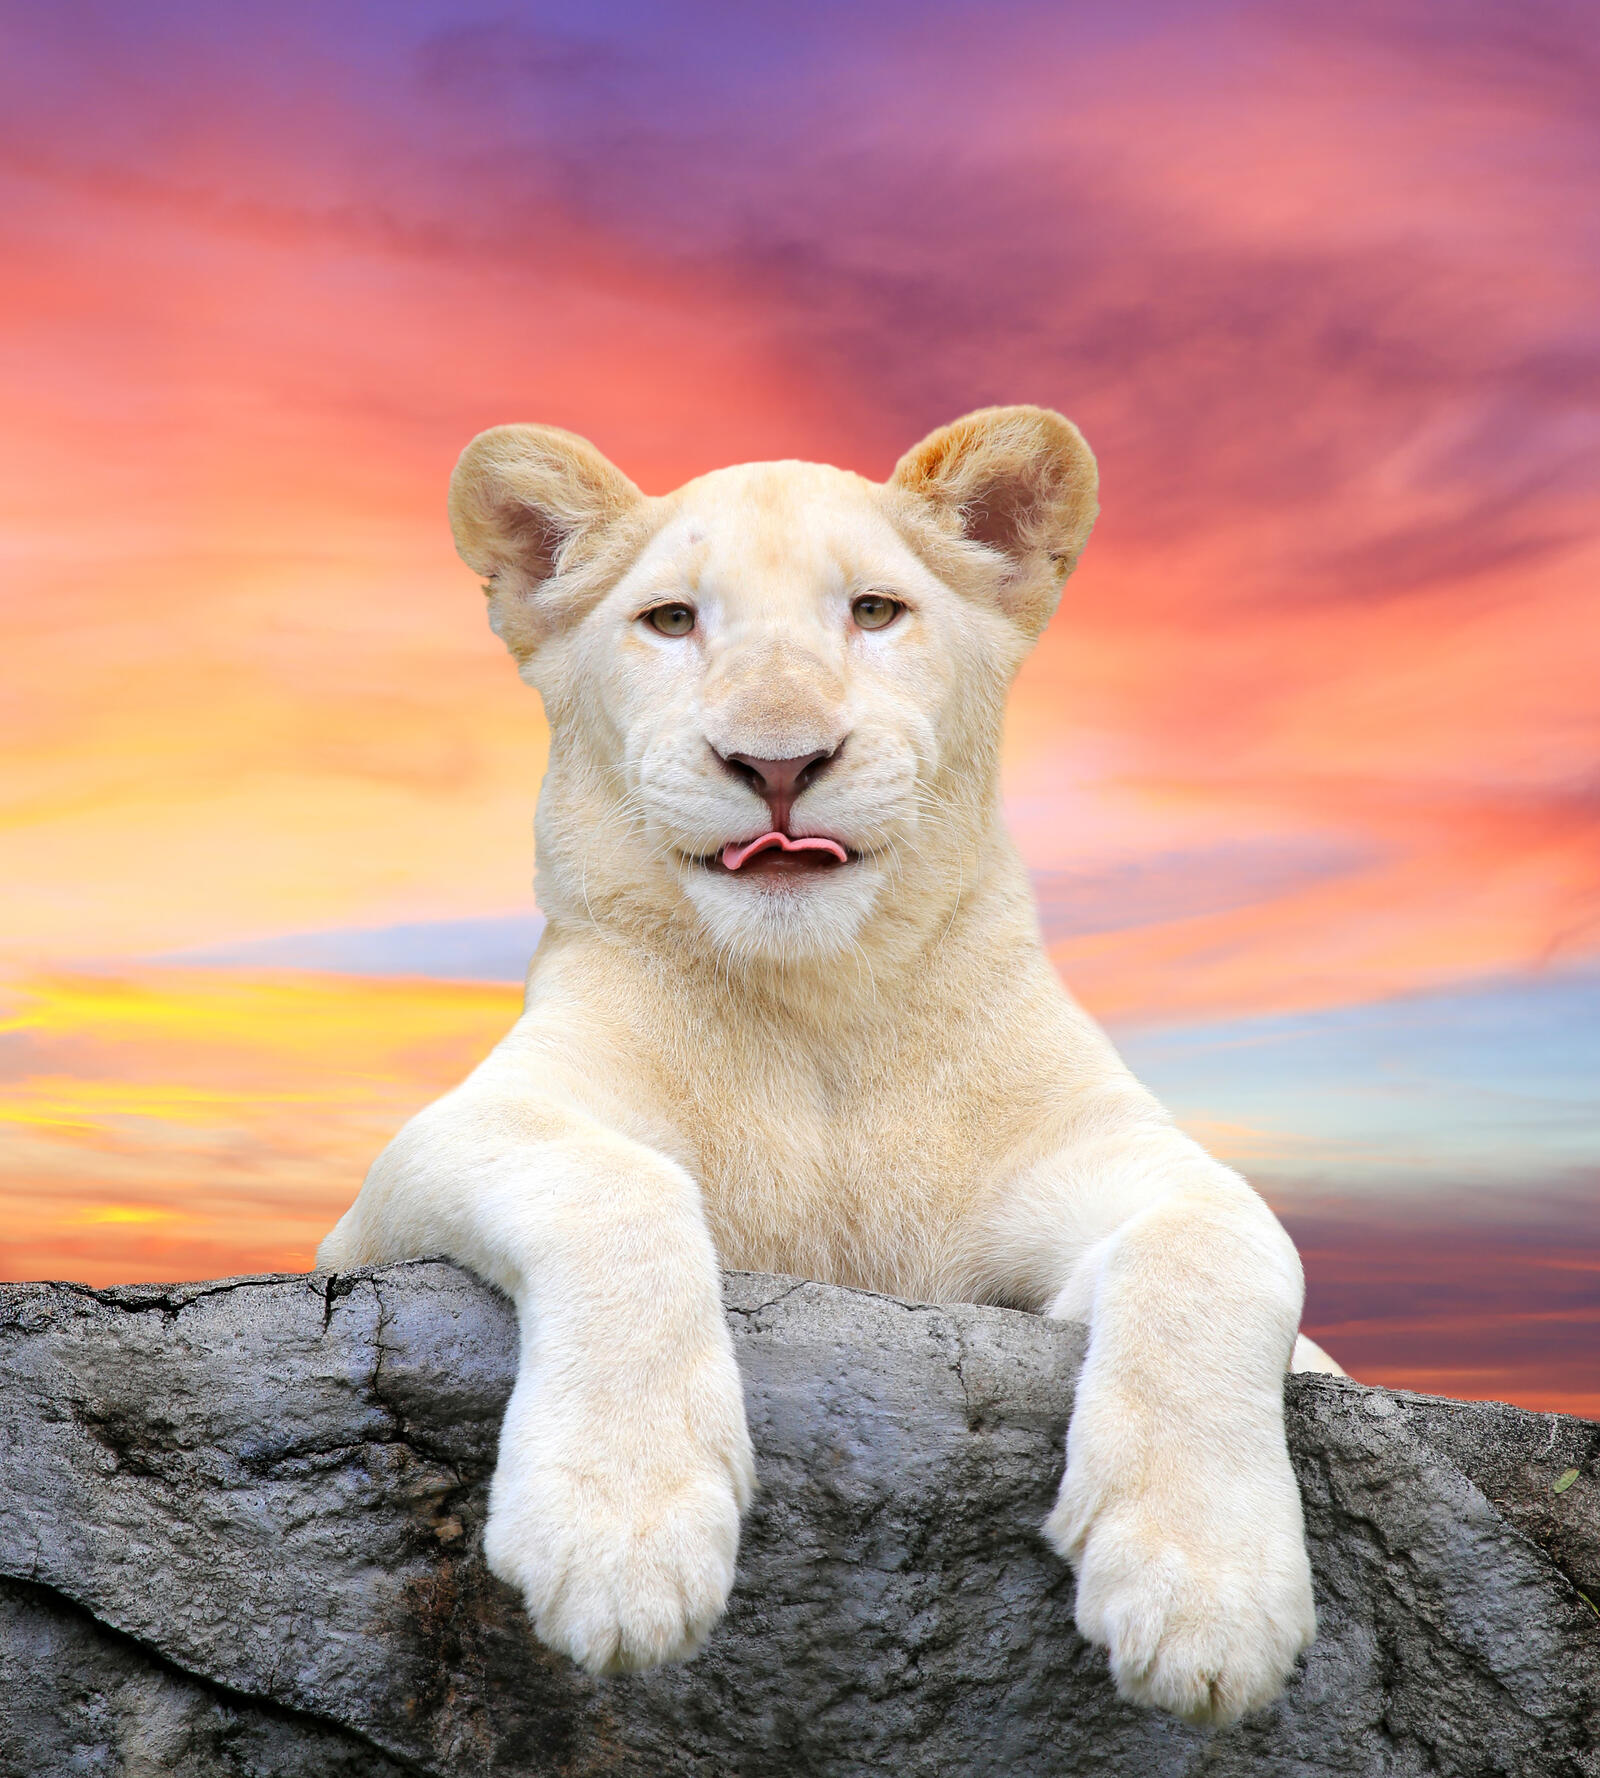 Wallpapers lion white look on the desktop